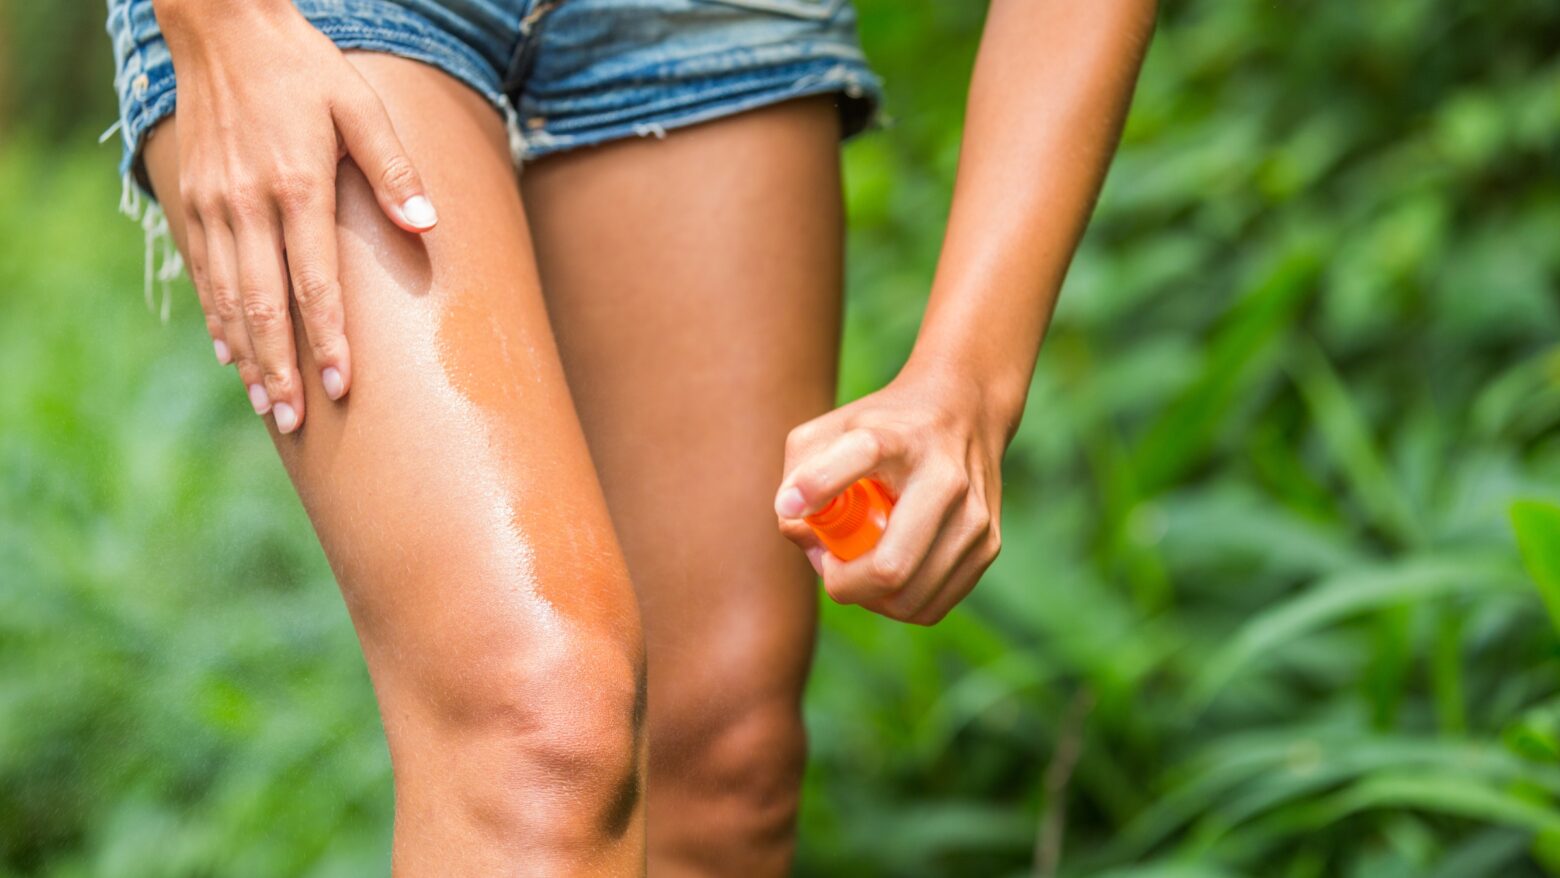 Woman applies a DEET-free spray to repel mosquitoes on her legs